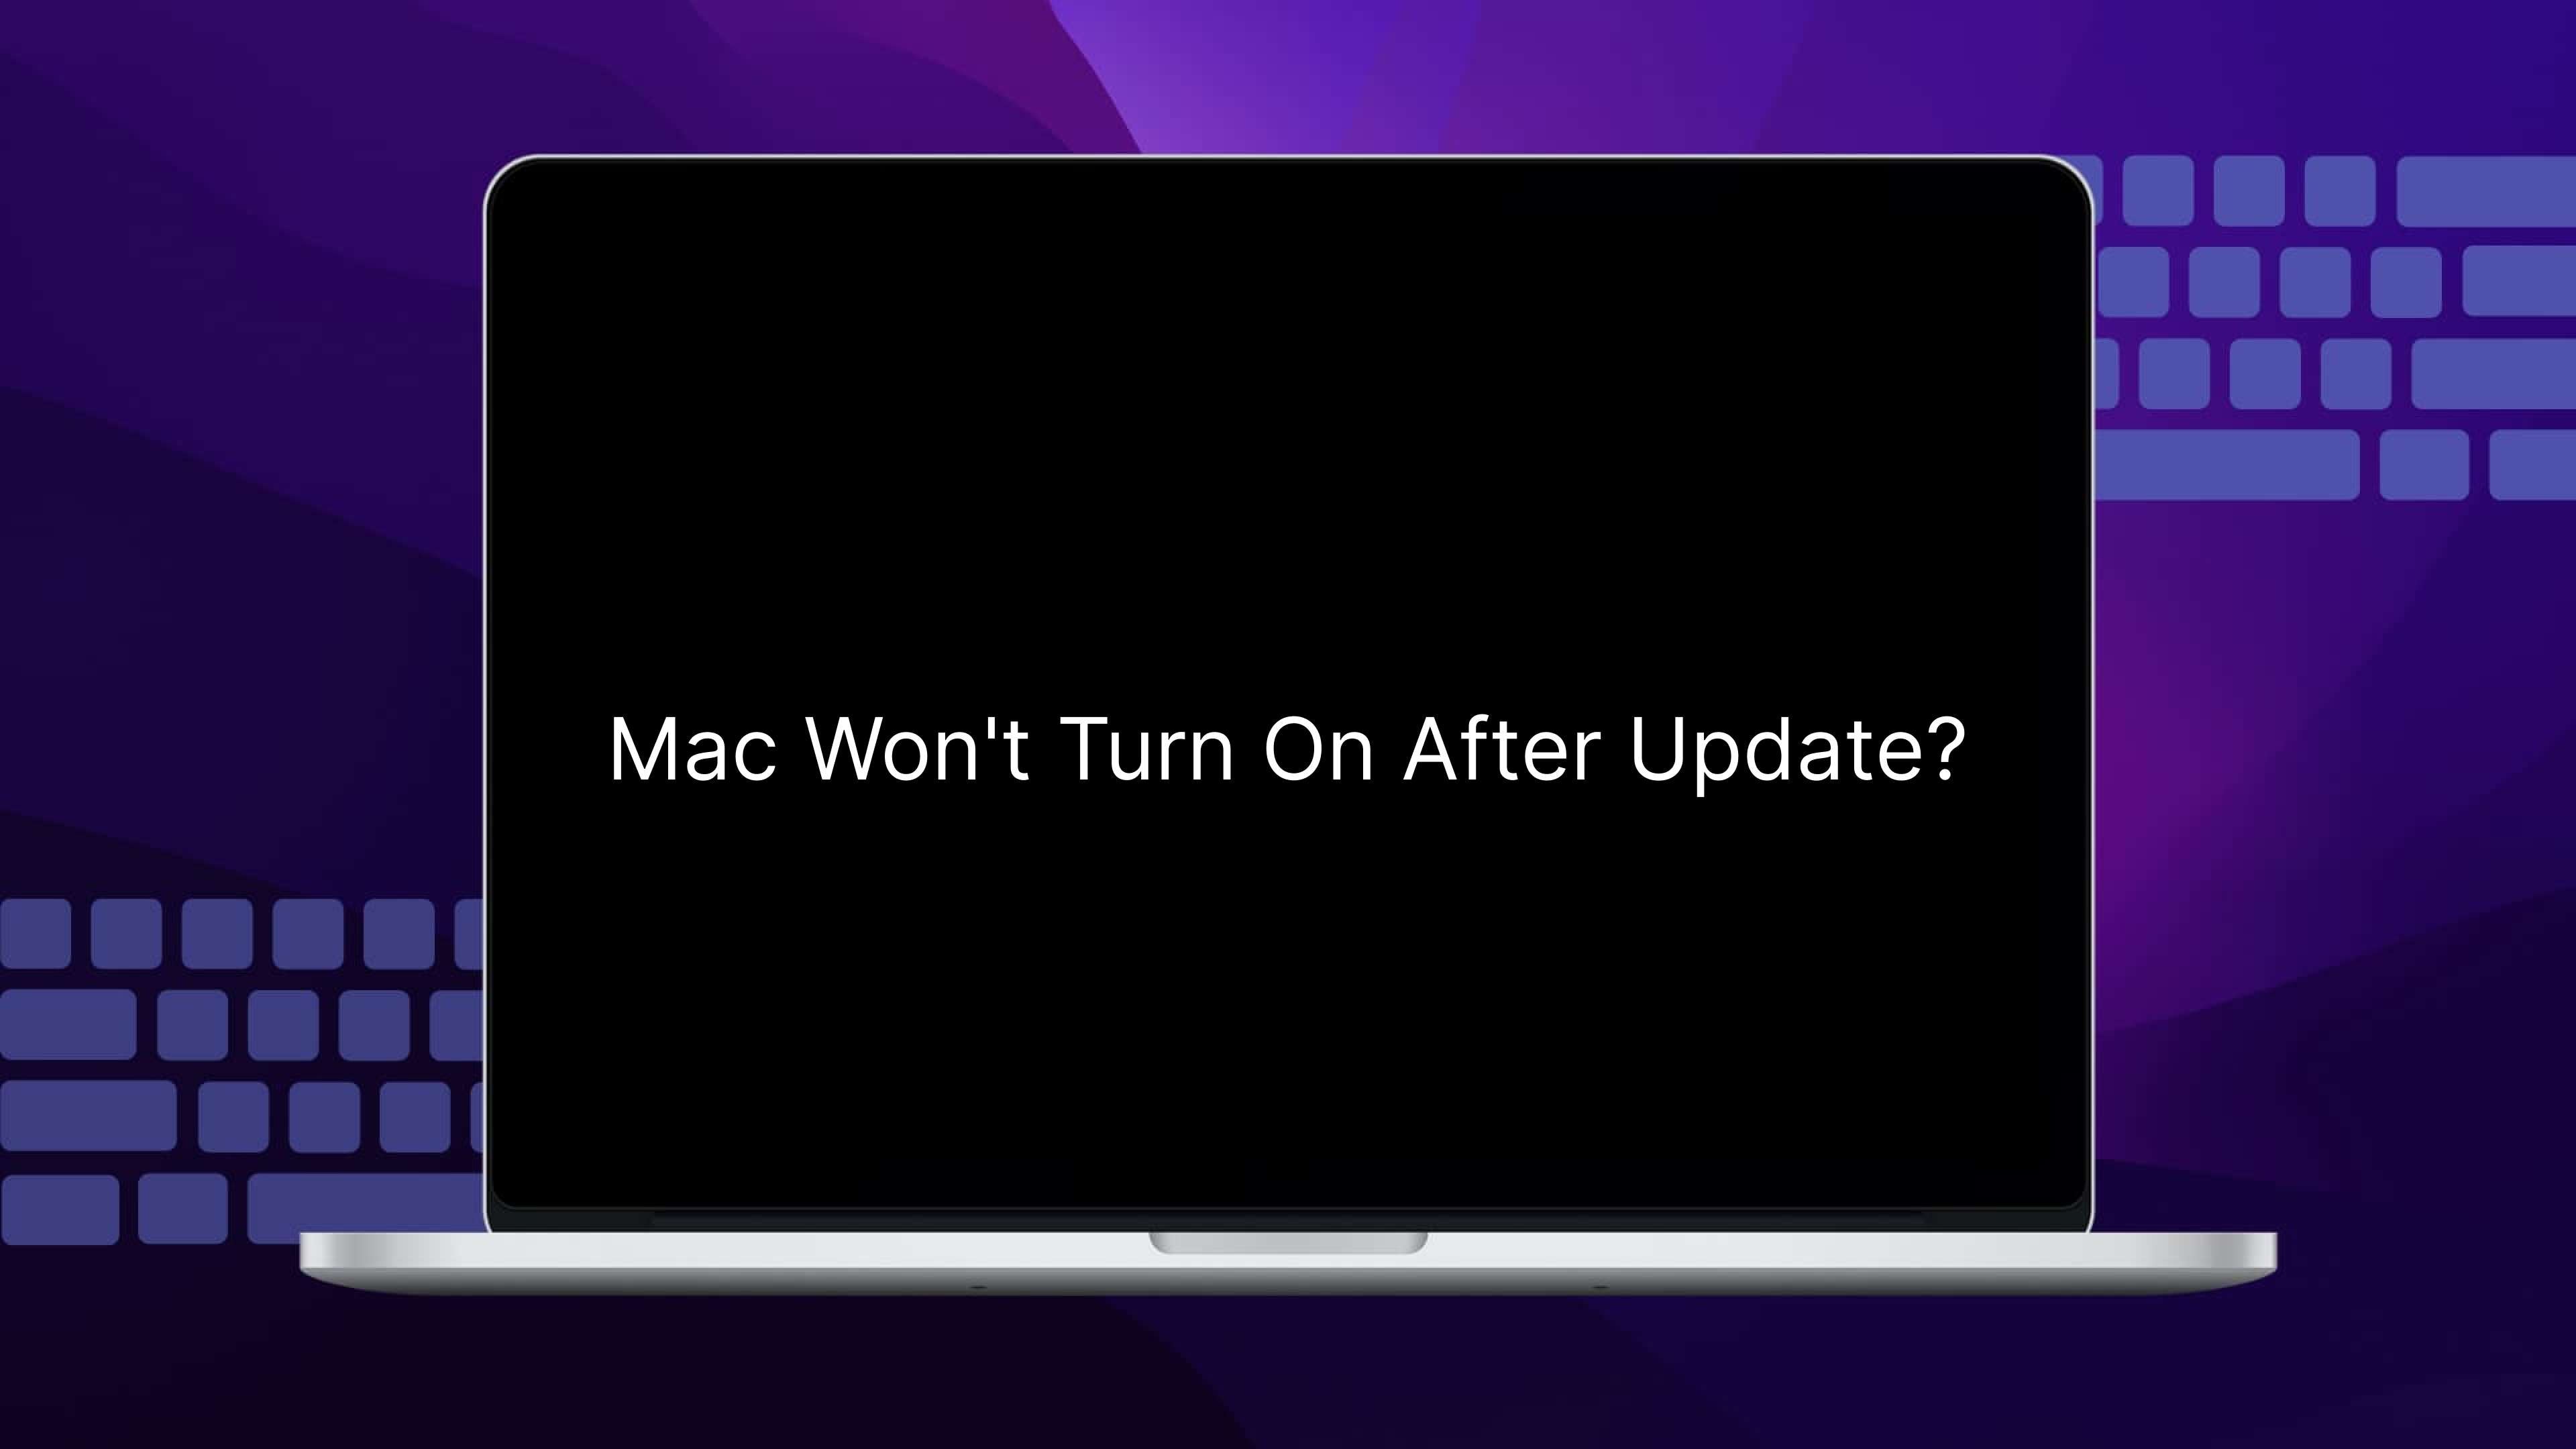 Mac Won't Turn On After Update? Try These 9 Fixes.